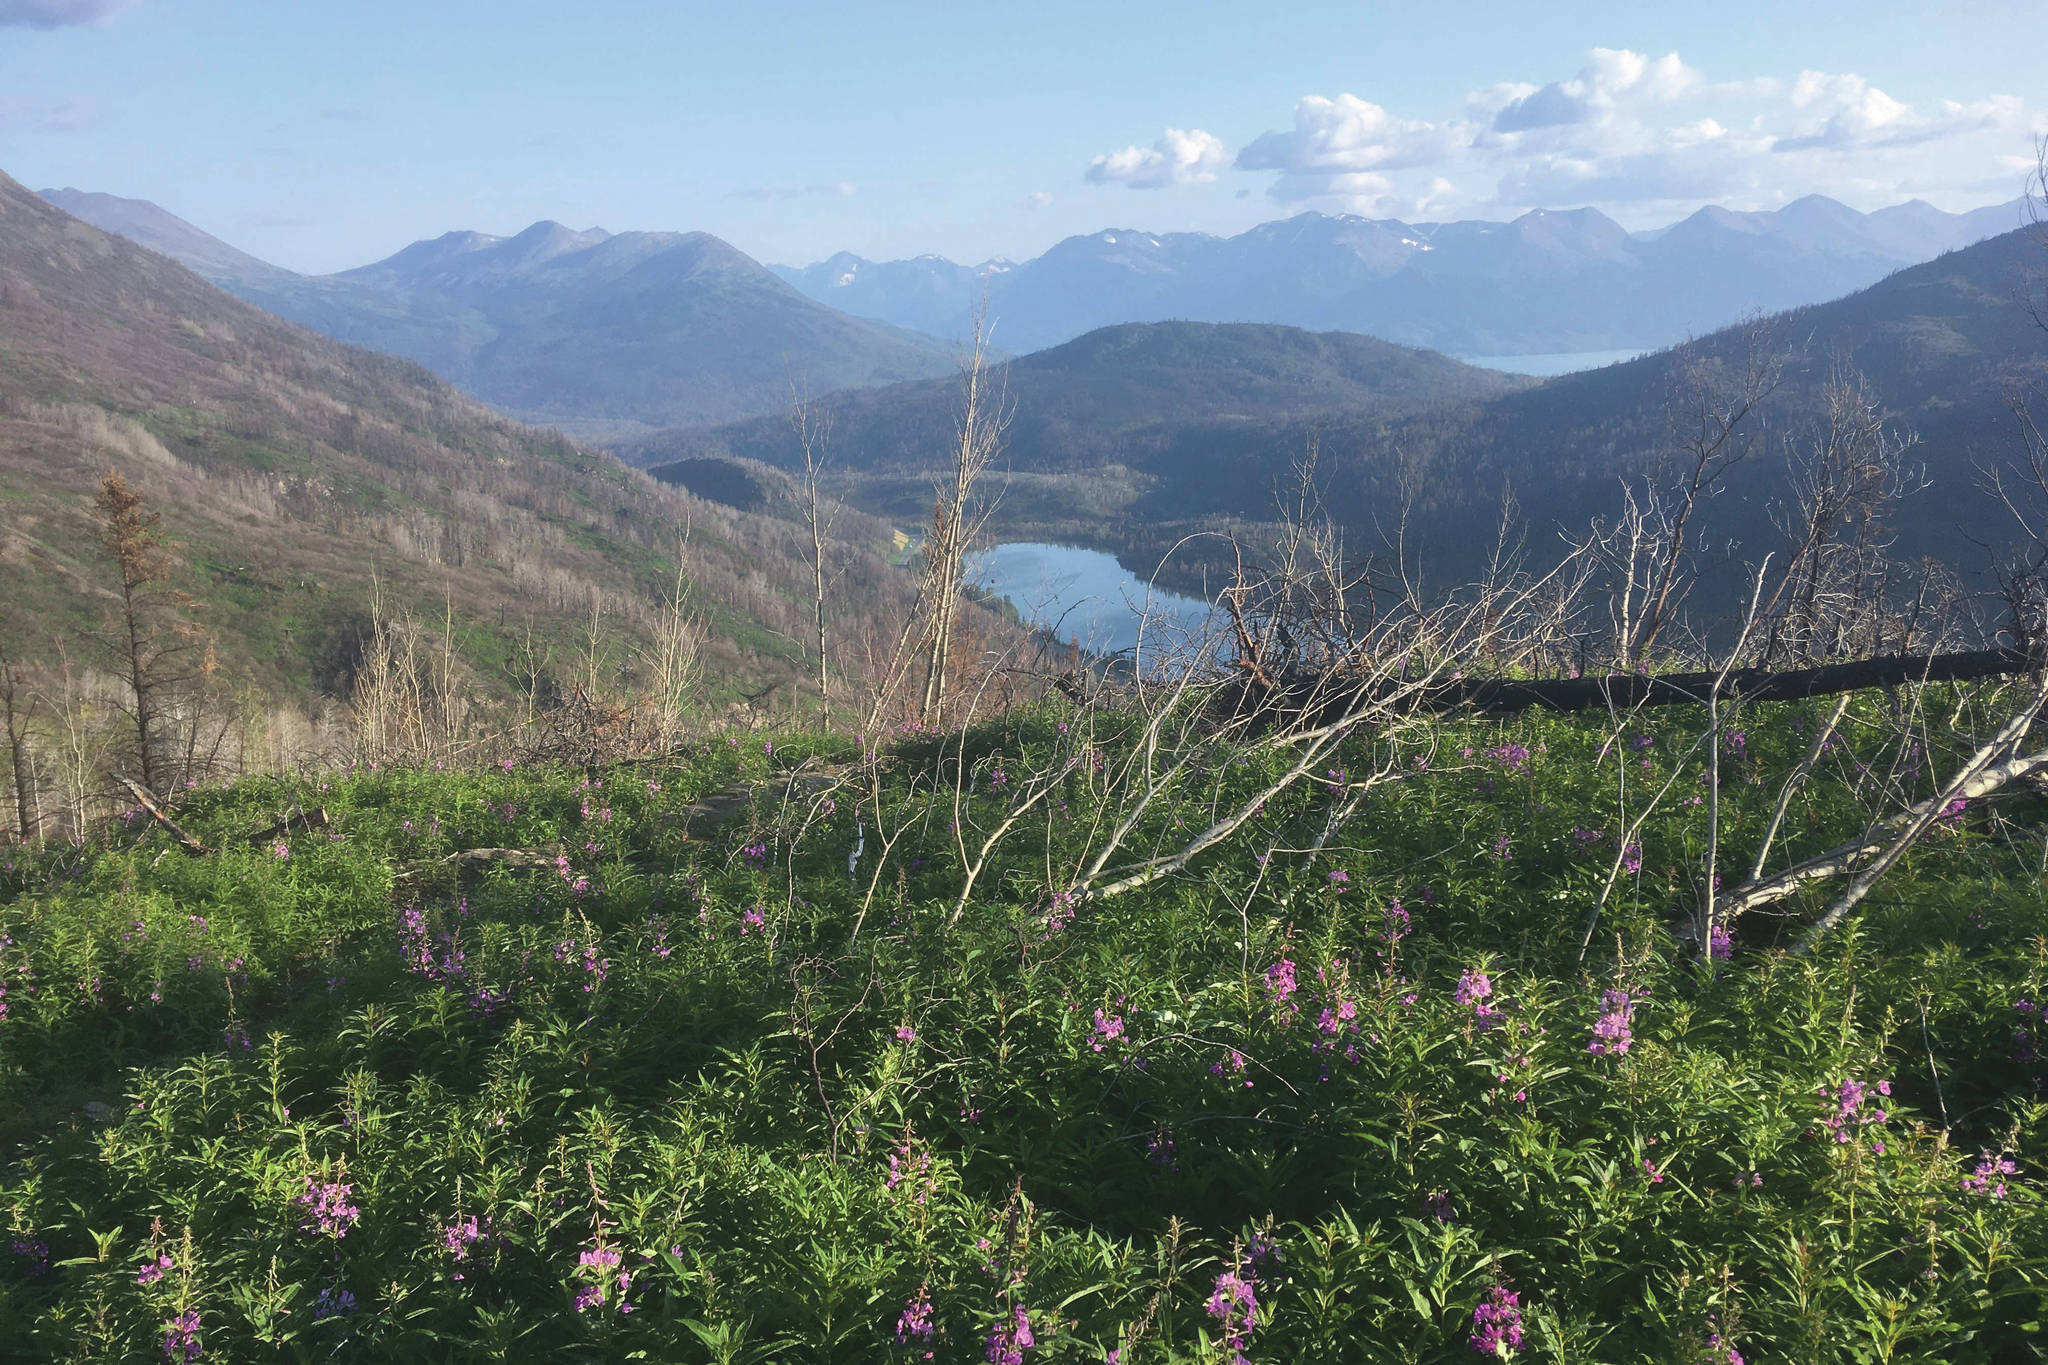 Fireweed dots the landscape on Skyline Trail on Sunday, August 16, 2020. (Photo by Jeff Helminiak/Peninsula Clarion)